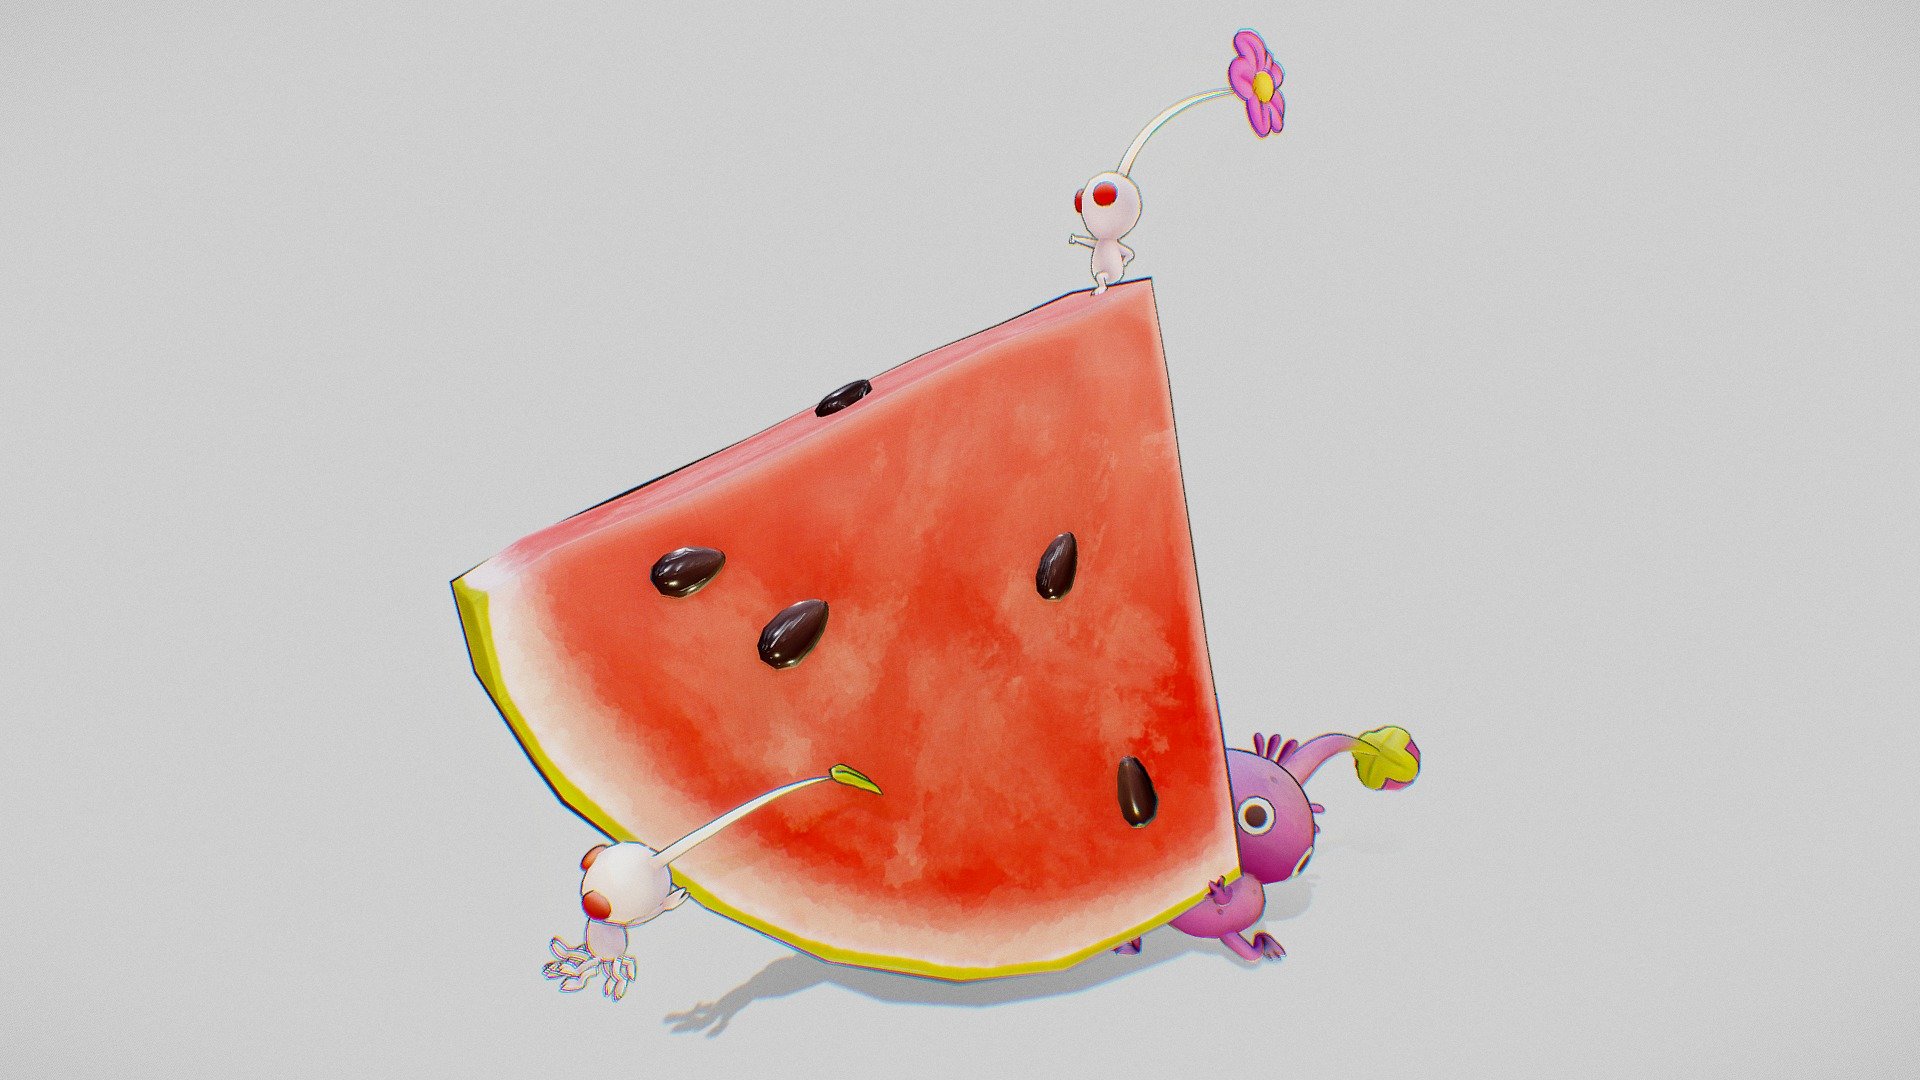 A 3D rendition of the amazing Illustration created by @apamaate (On Twitter)
More Images and a Rendered Video: artstation.com/artwork/VgvJm4

I Hope You like it! - Pikmin and the Watermelon - 3D model by Andy (Pandabox) (@ItsPandaBox) 3d model